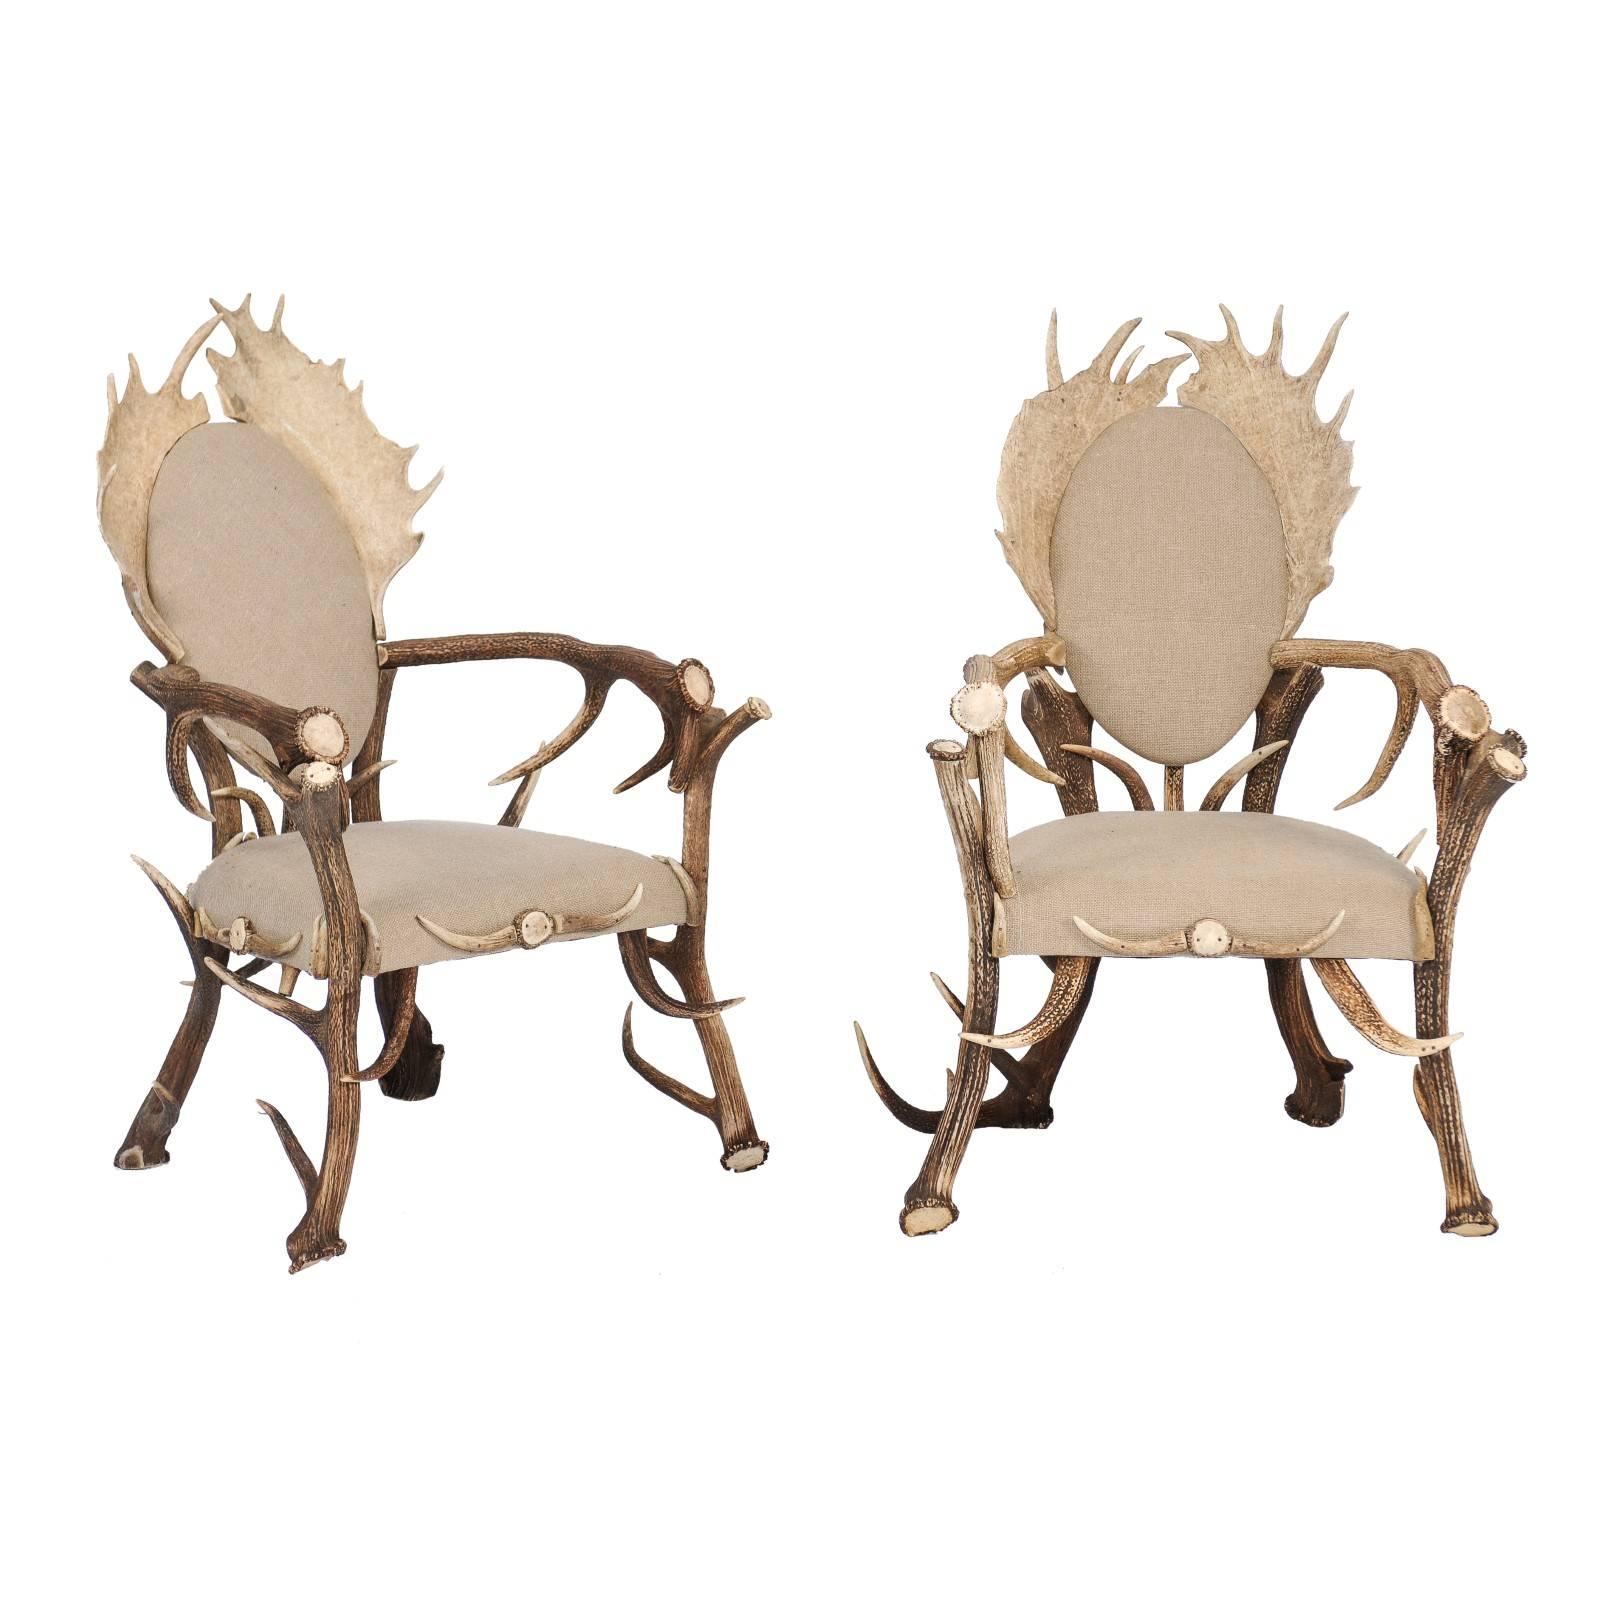 Pair of Antler Armchairs from the Forests of France and Upholstered in Linen